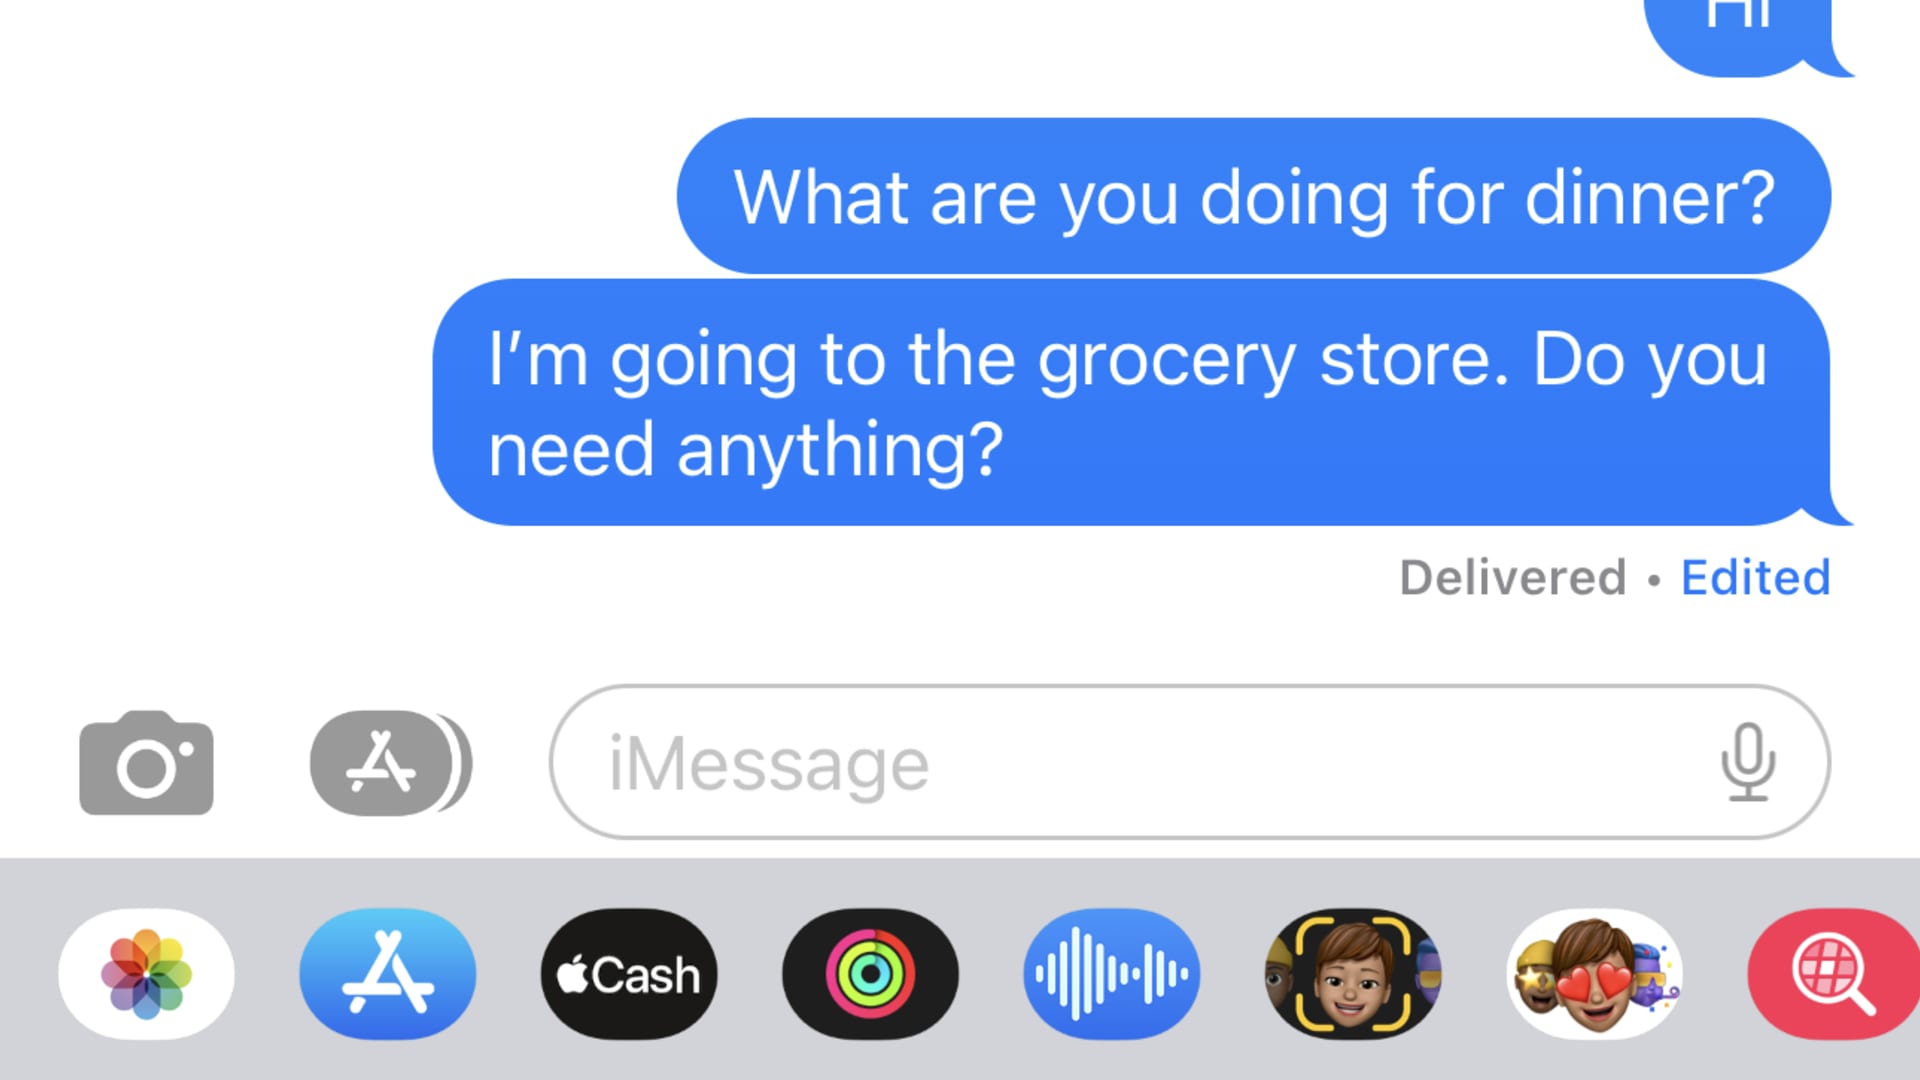 Edited text on iMessage using iOS16.